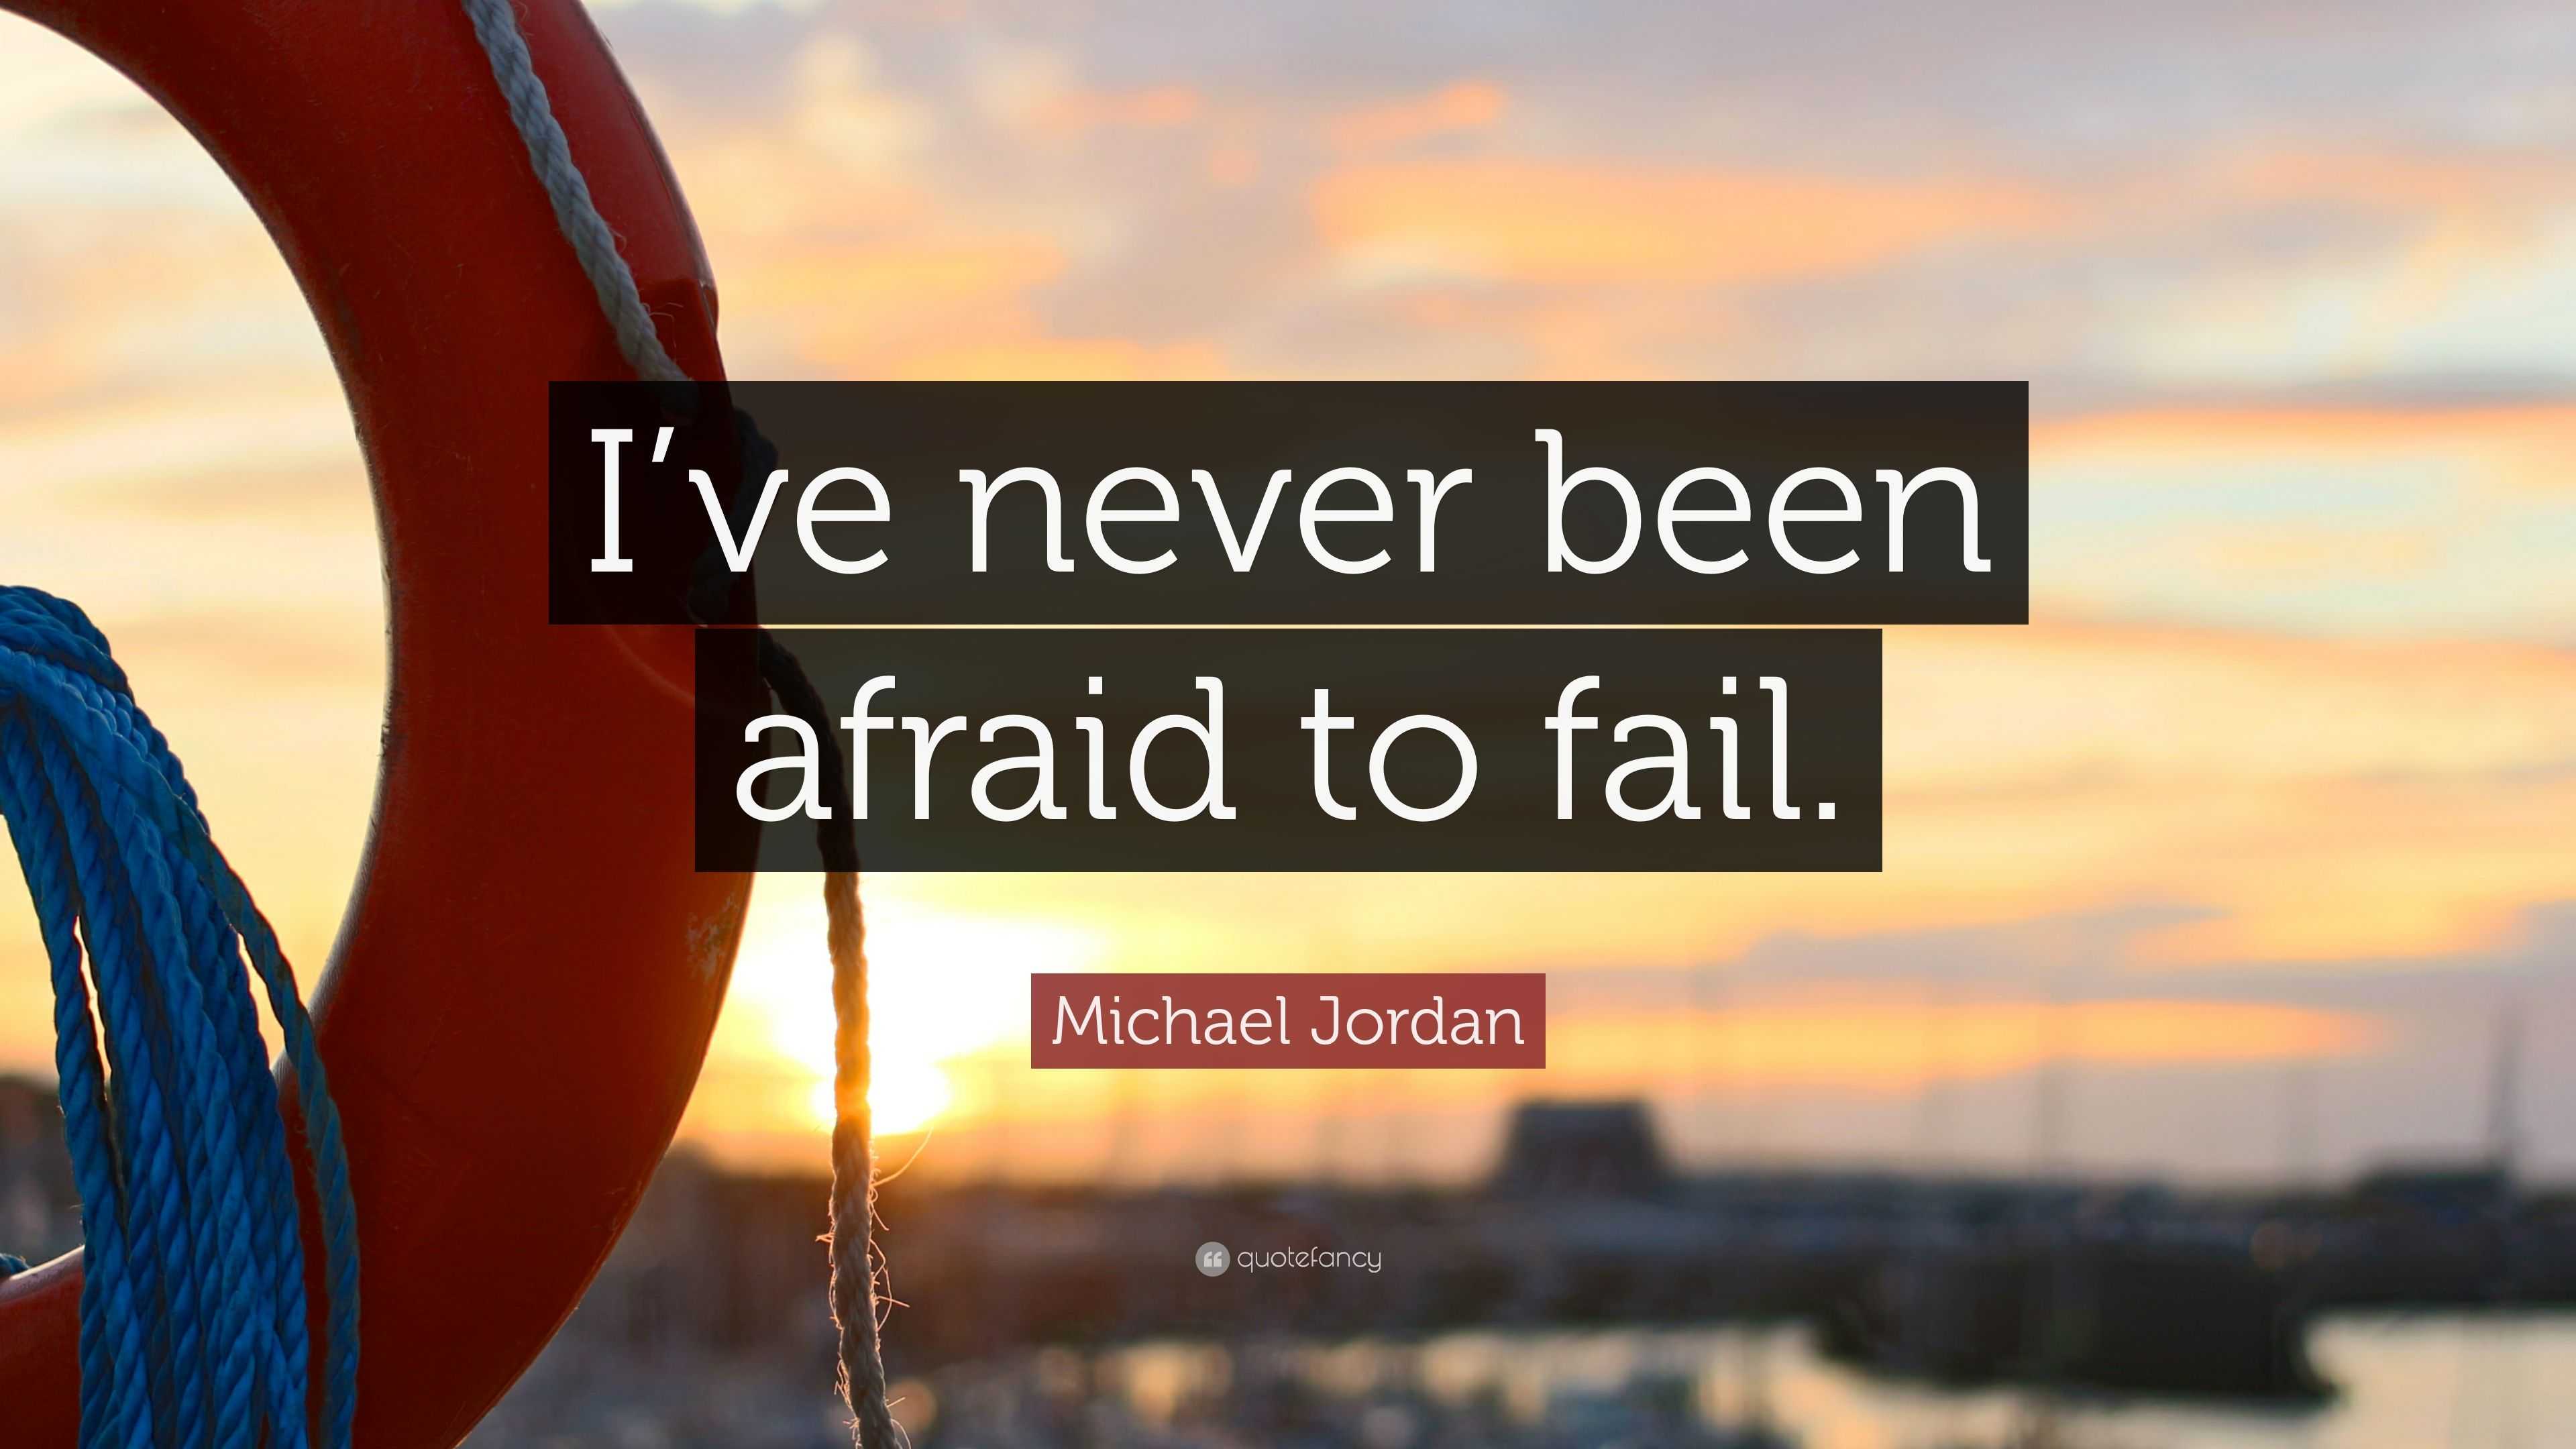 Michael Jordan Quote: “I’ve never been afraid to fail.”